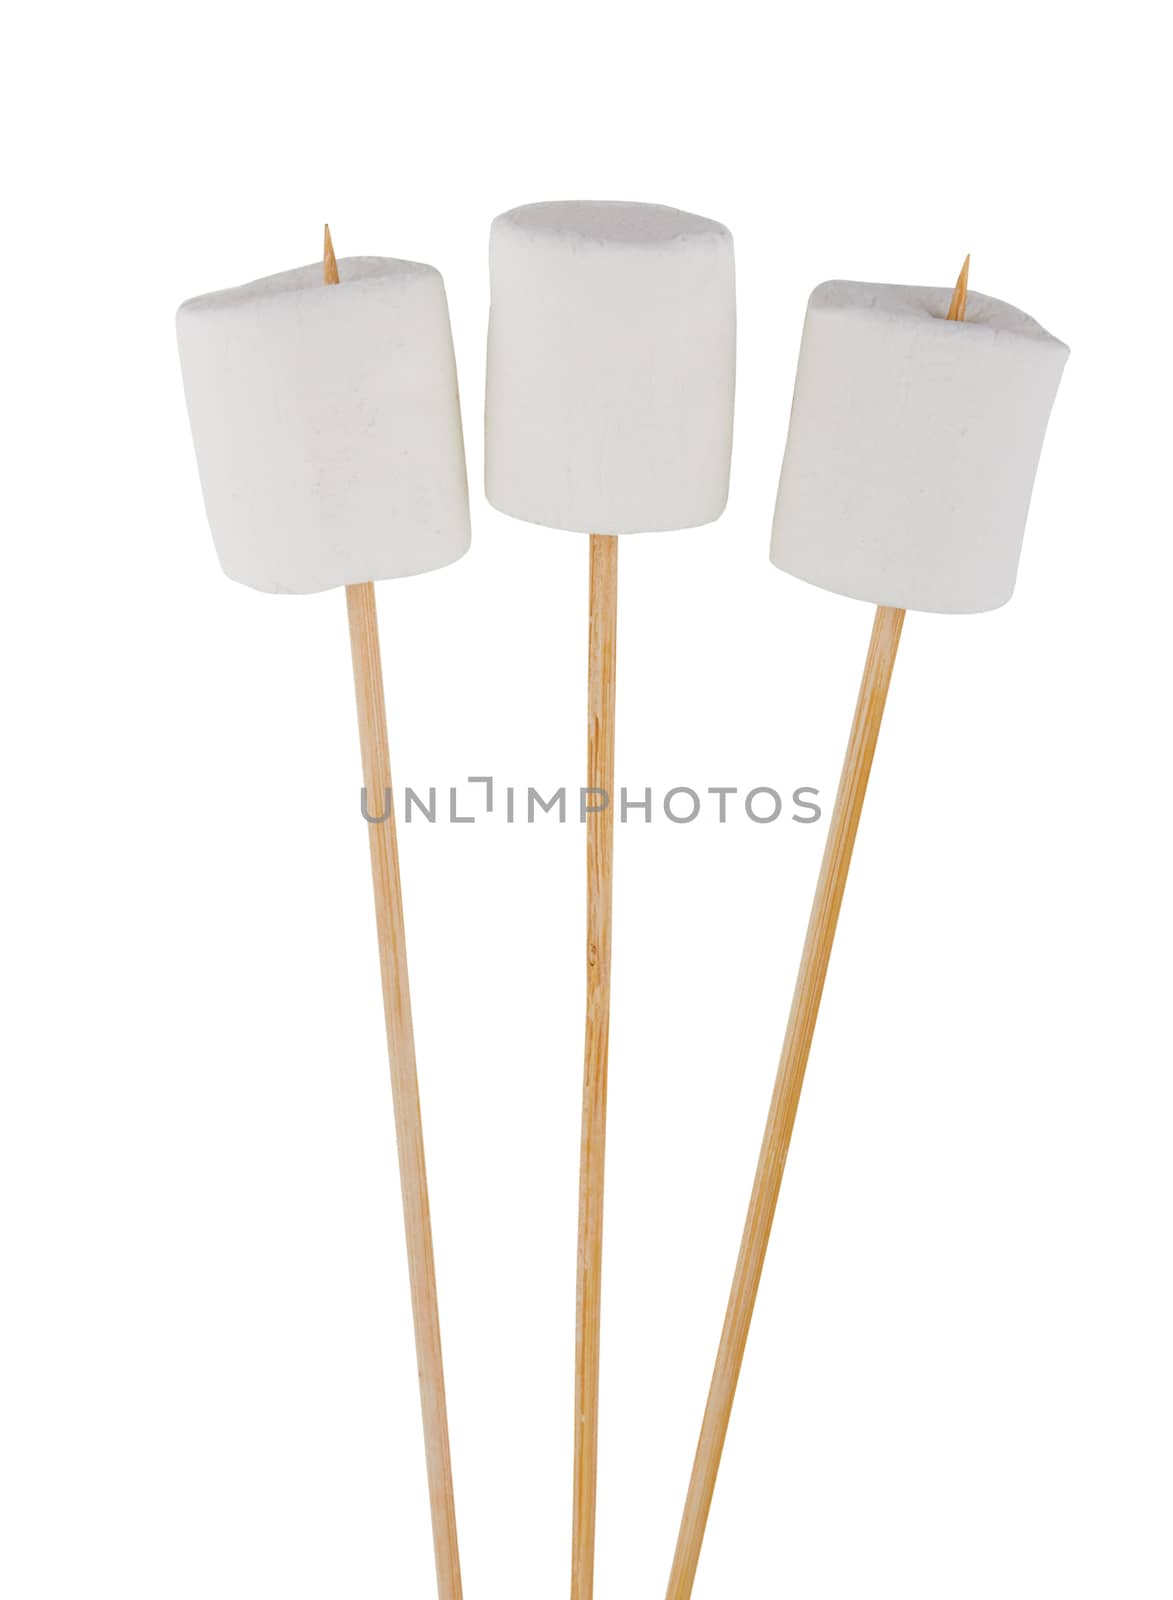 Marshmallow on a wooden stick isolated on white background